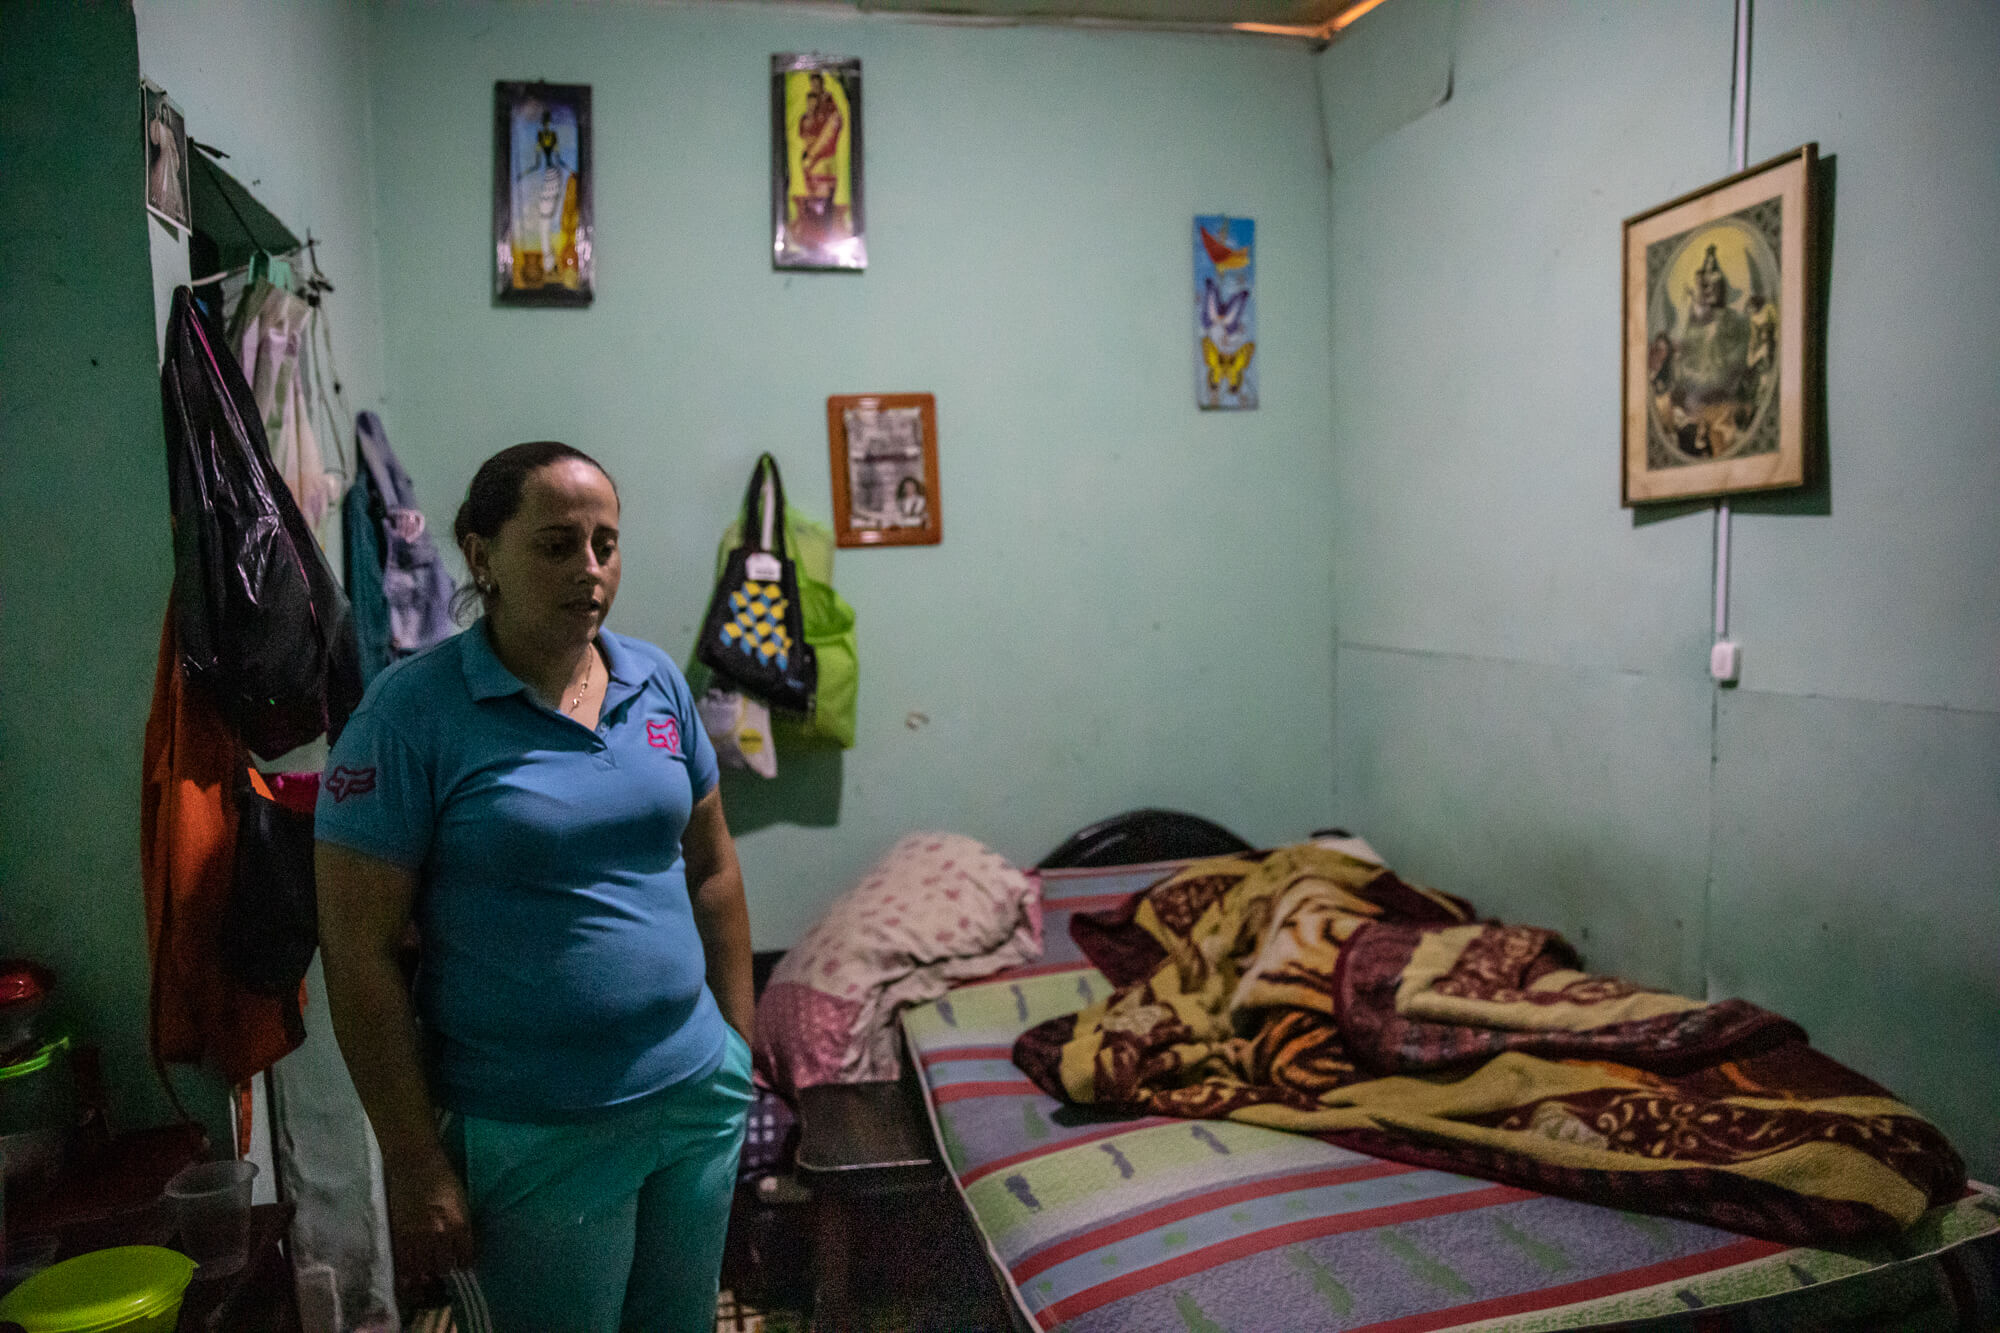 A woman wearing a blue shirt looks down over her small rented room